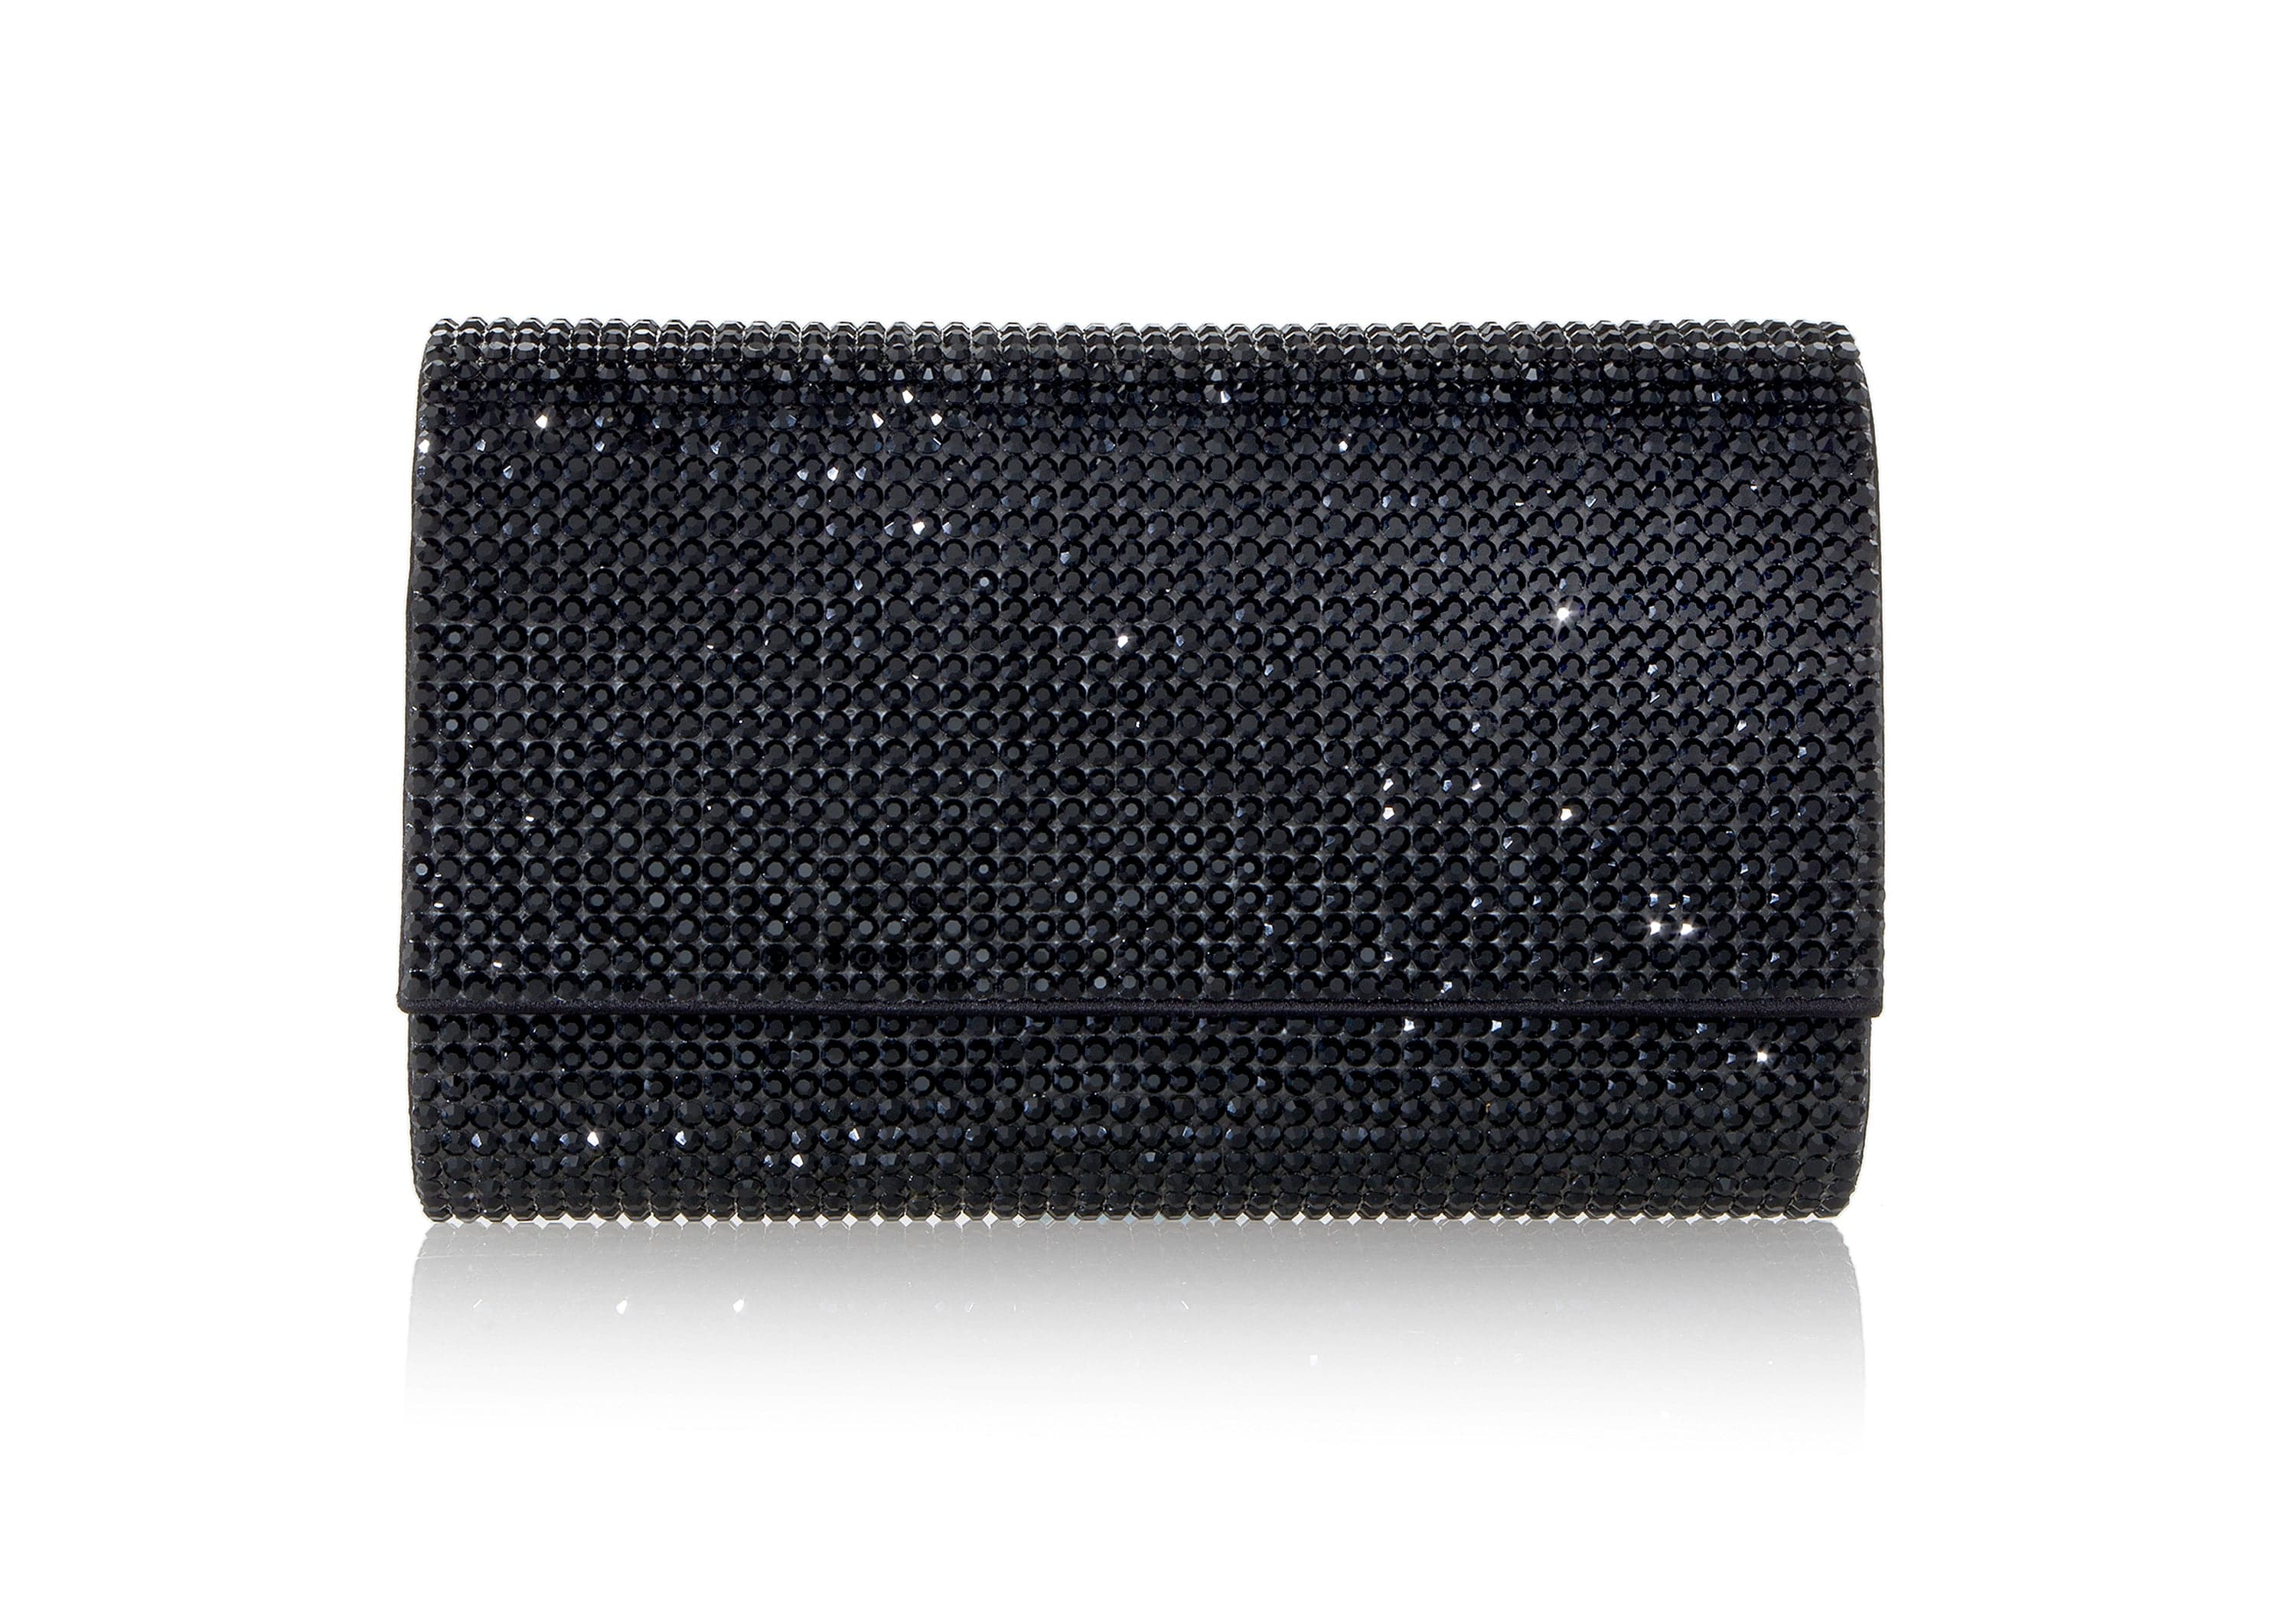 Judith Leiber Covered Clutch Purse